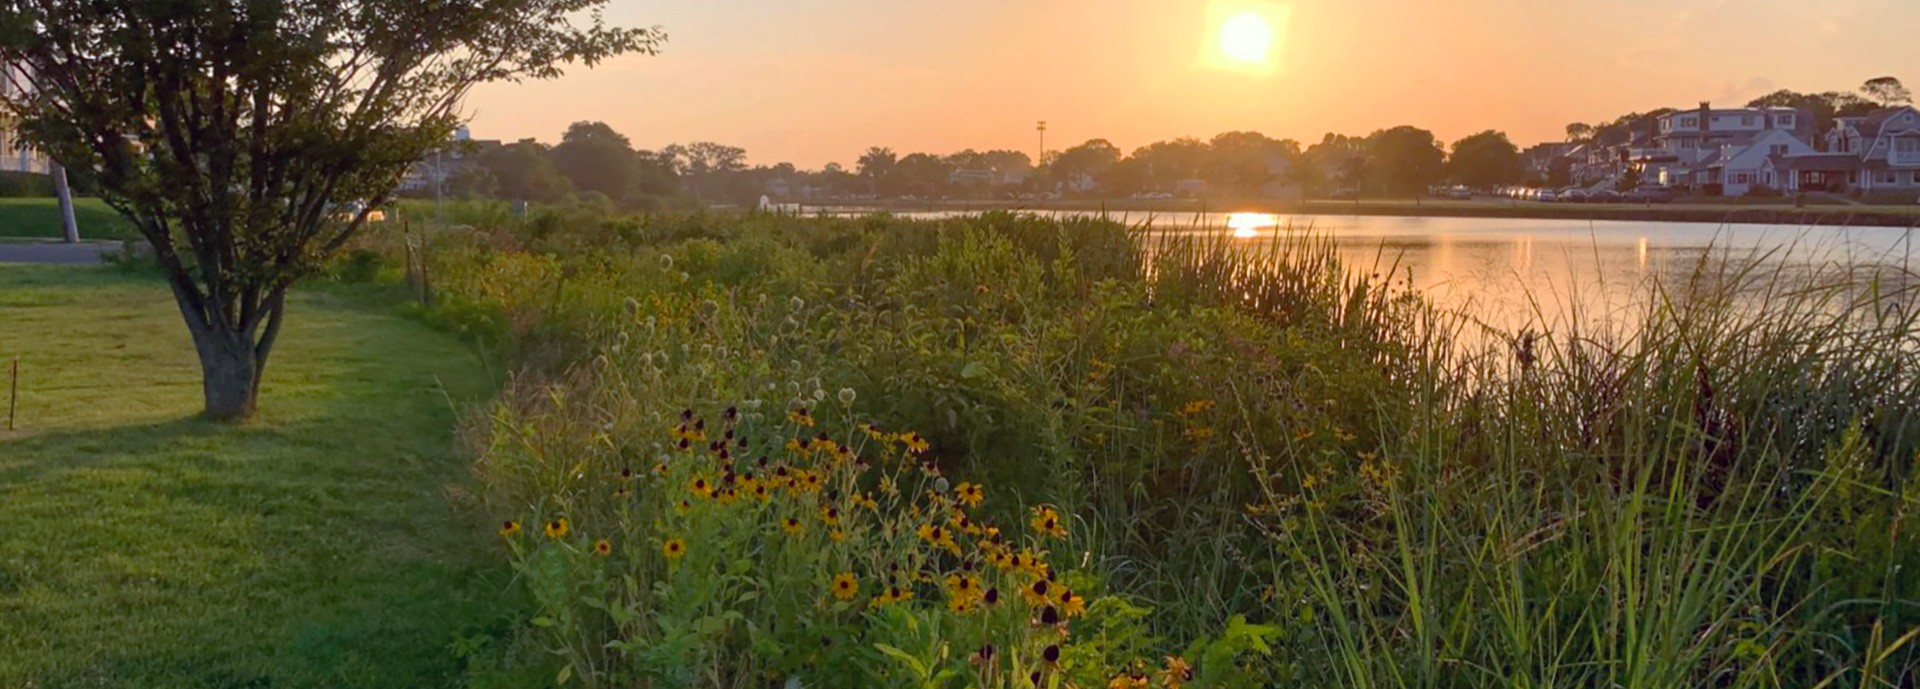 view of sylvan lake shoreline at sunset with flowers and a tree